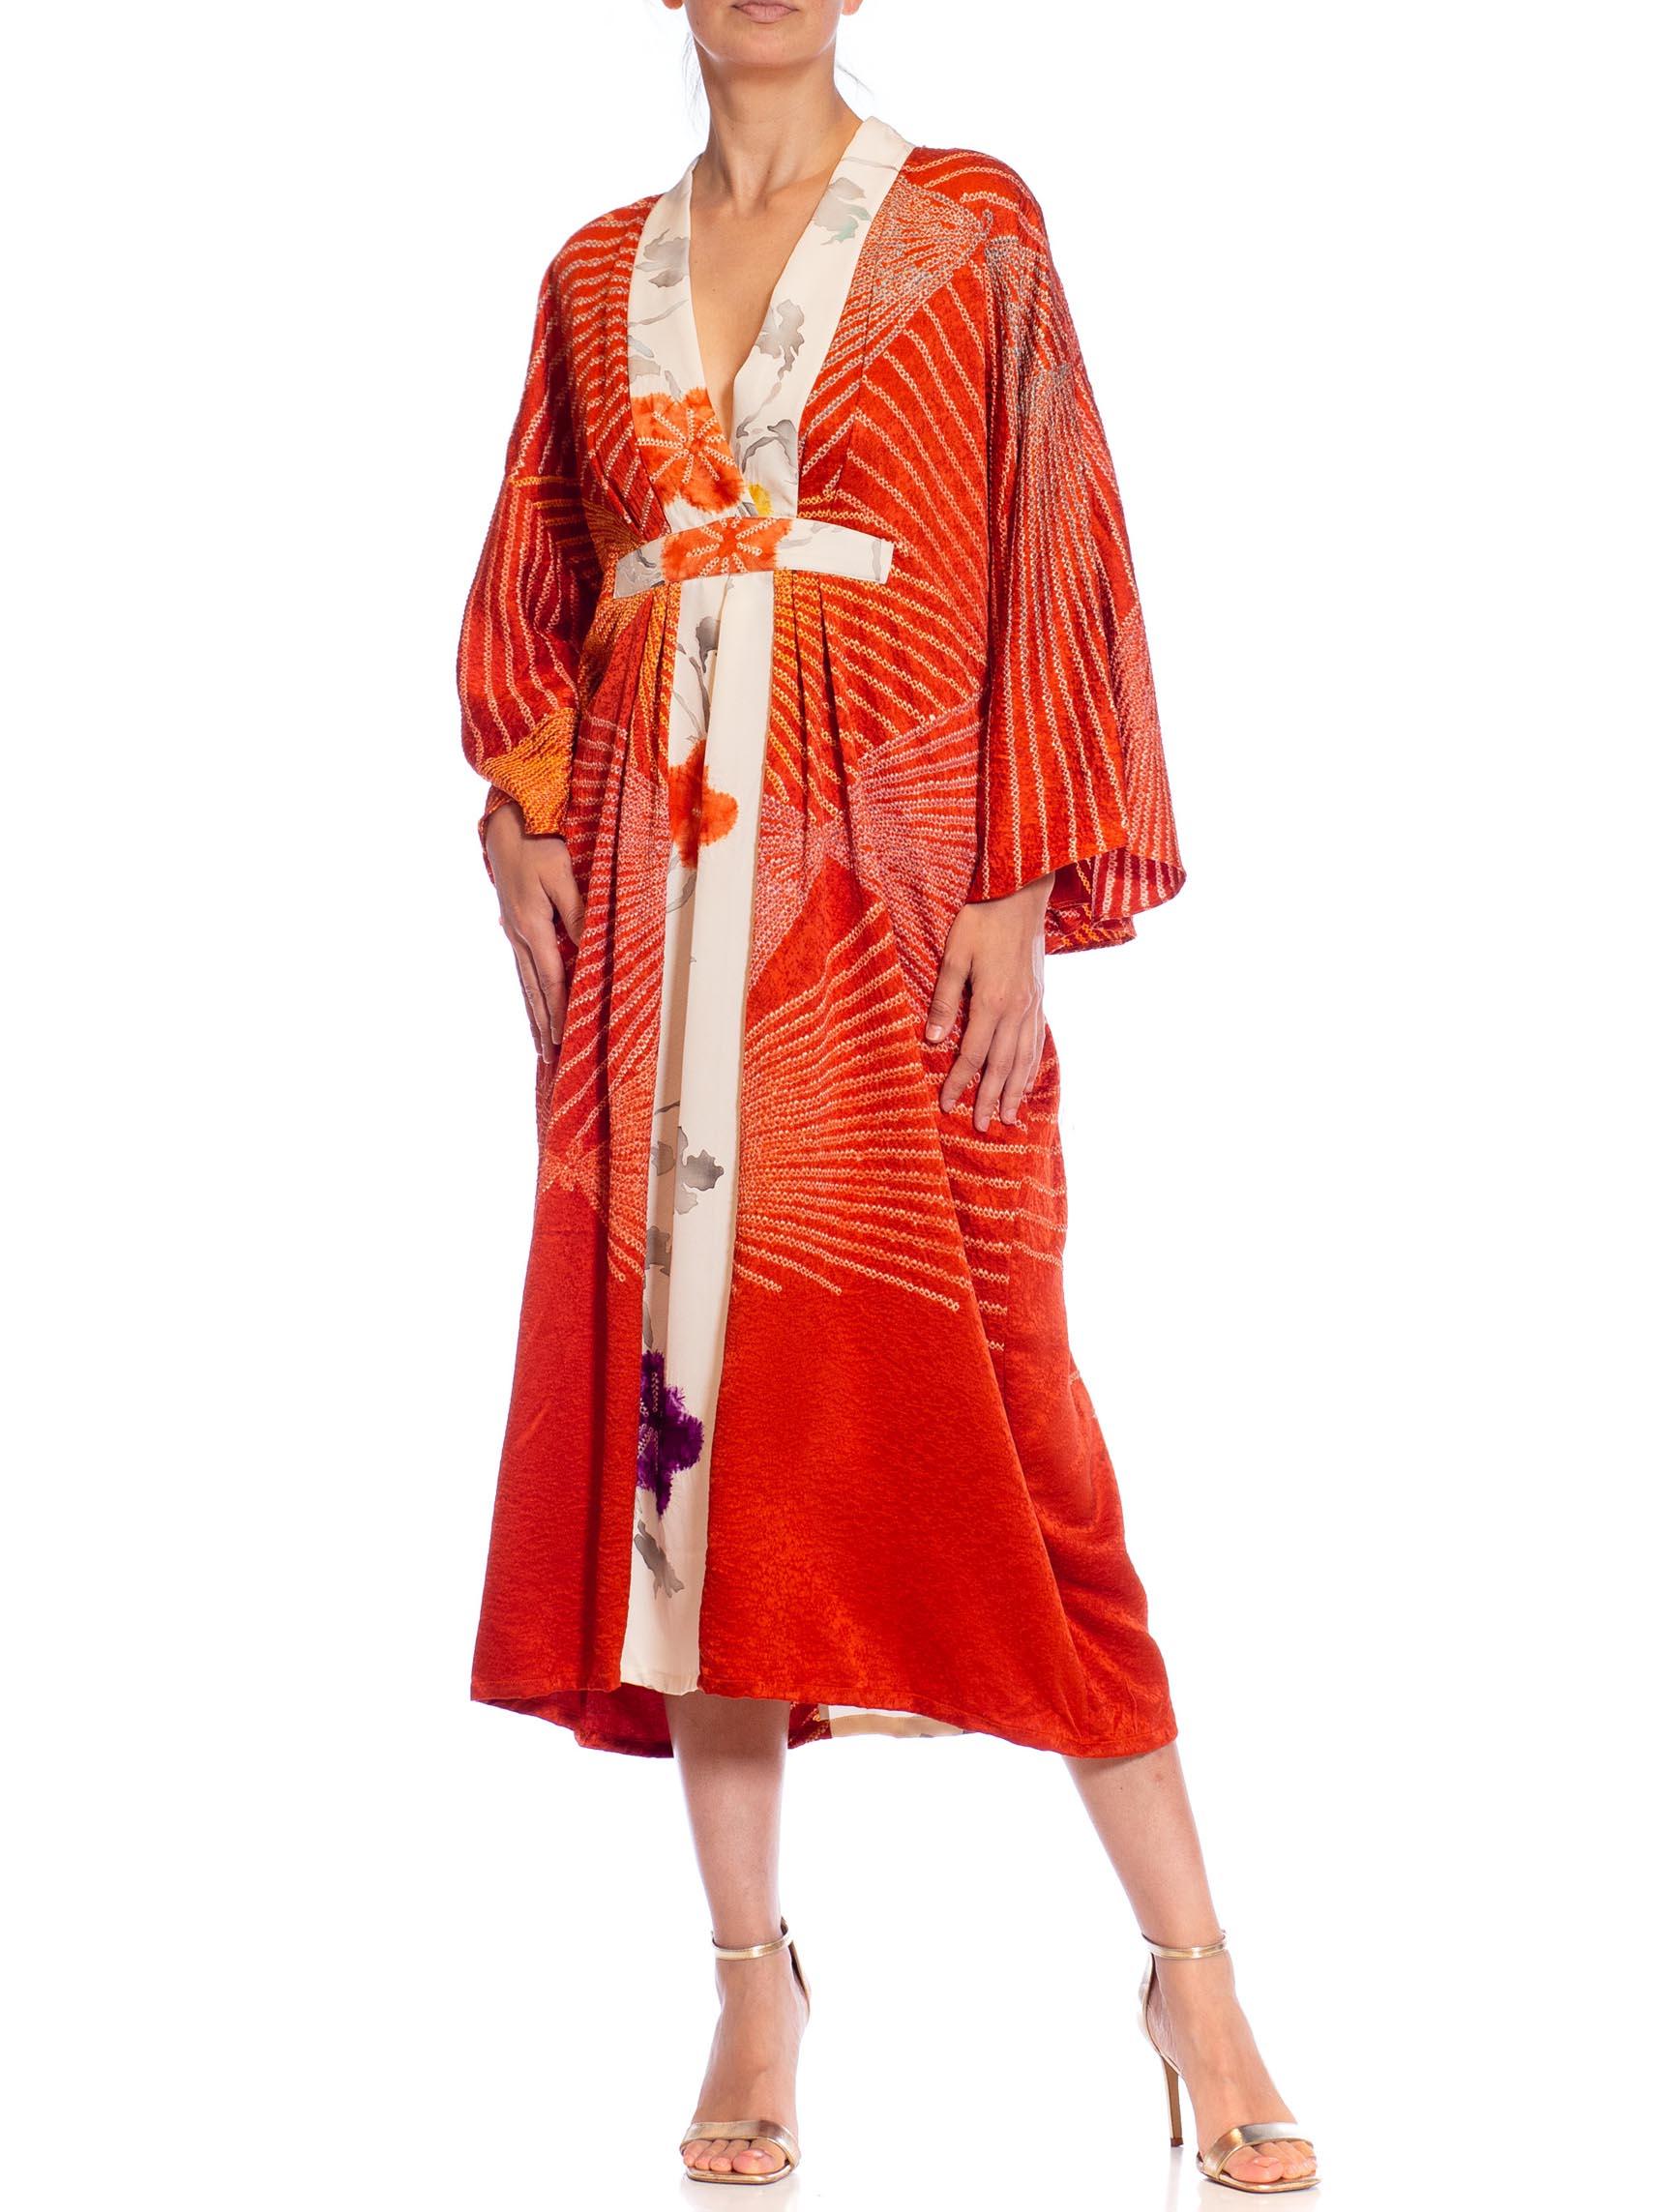 MORPHEW COLLECTION Red Shibori Japanese Kimono Silk Body Kaftan Hand Painted Cr In Excellent Condition For Sale In New York, NY